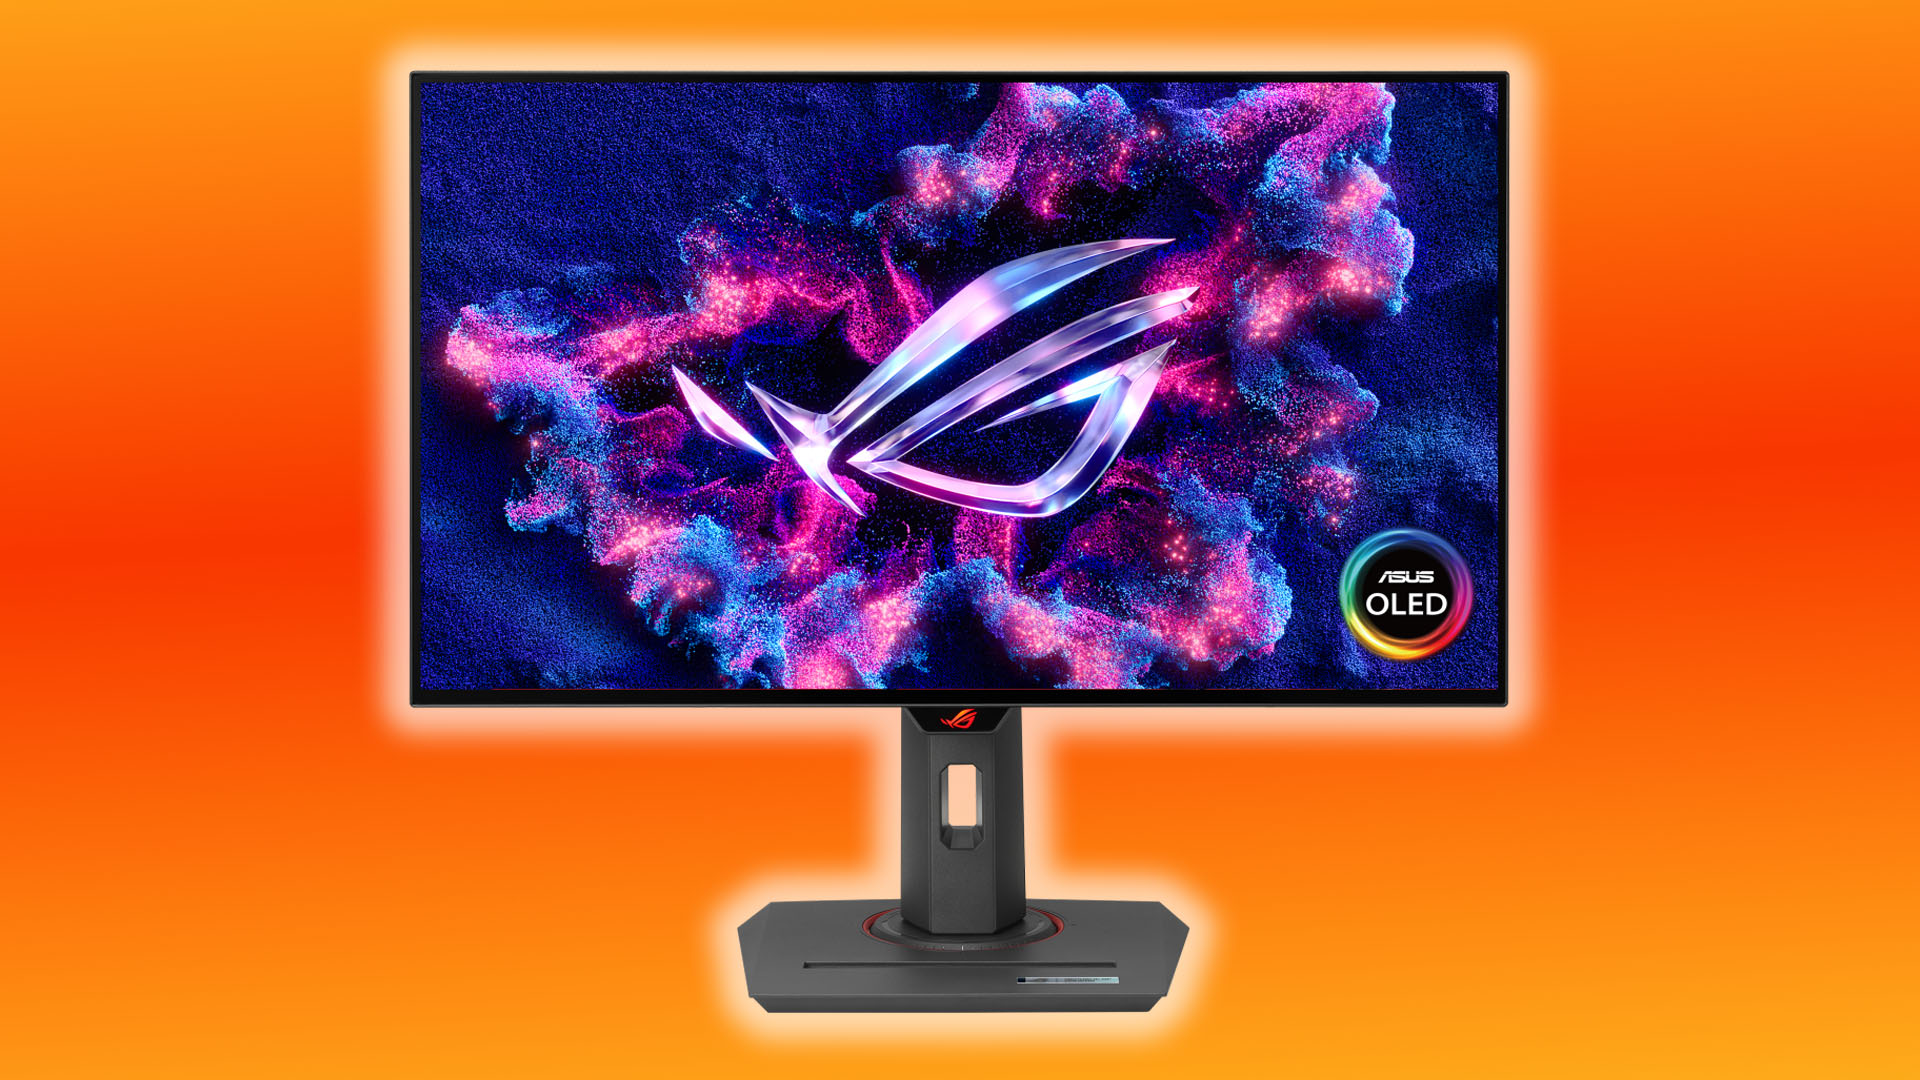 Asus ROG Strix OLED XG27AQDMG: The OLED Monitor with a Unique Glossy White Panel and Impressive Gaming Specs